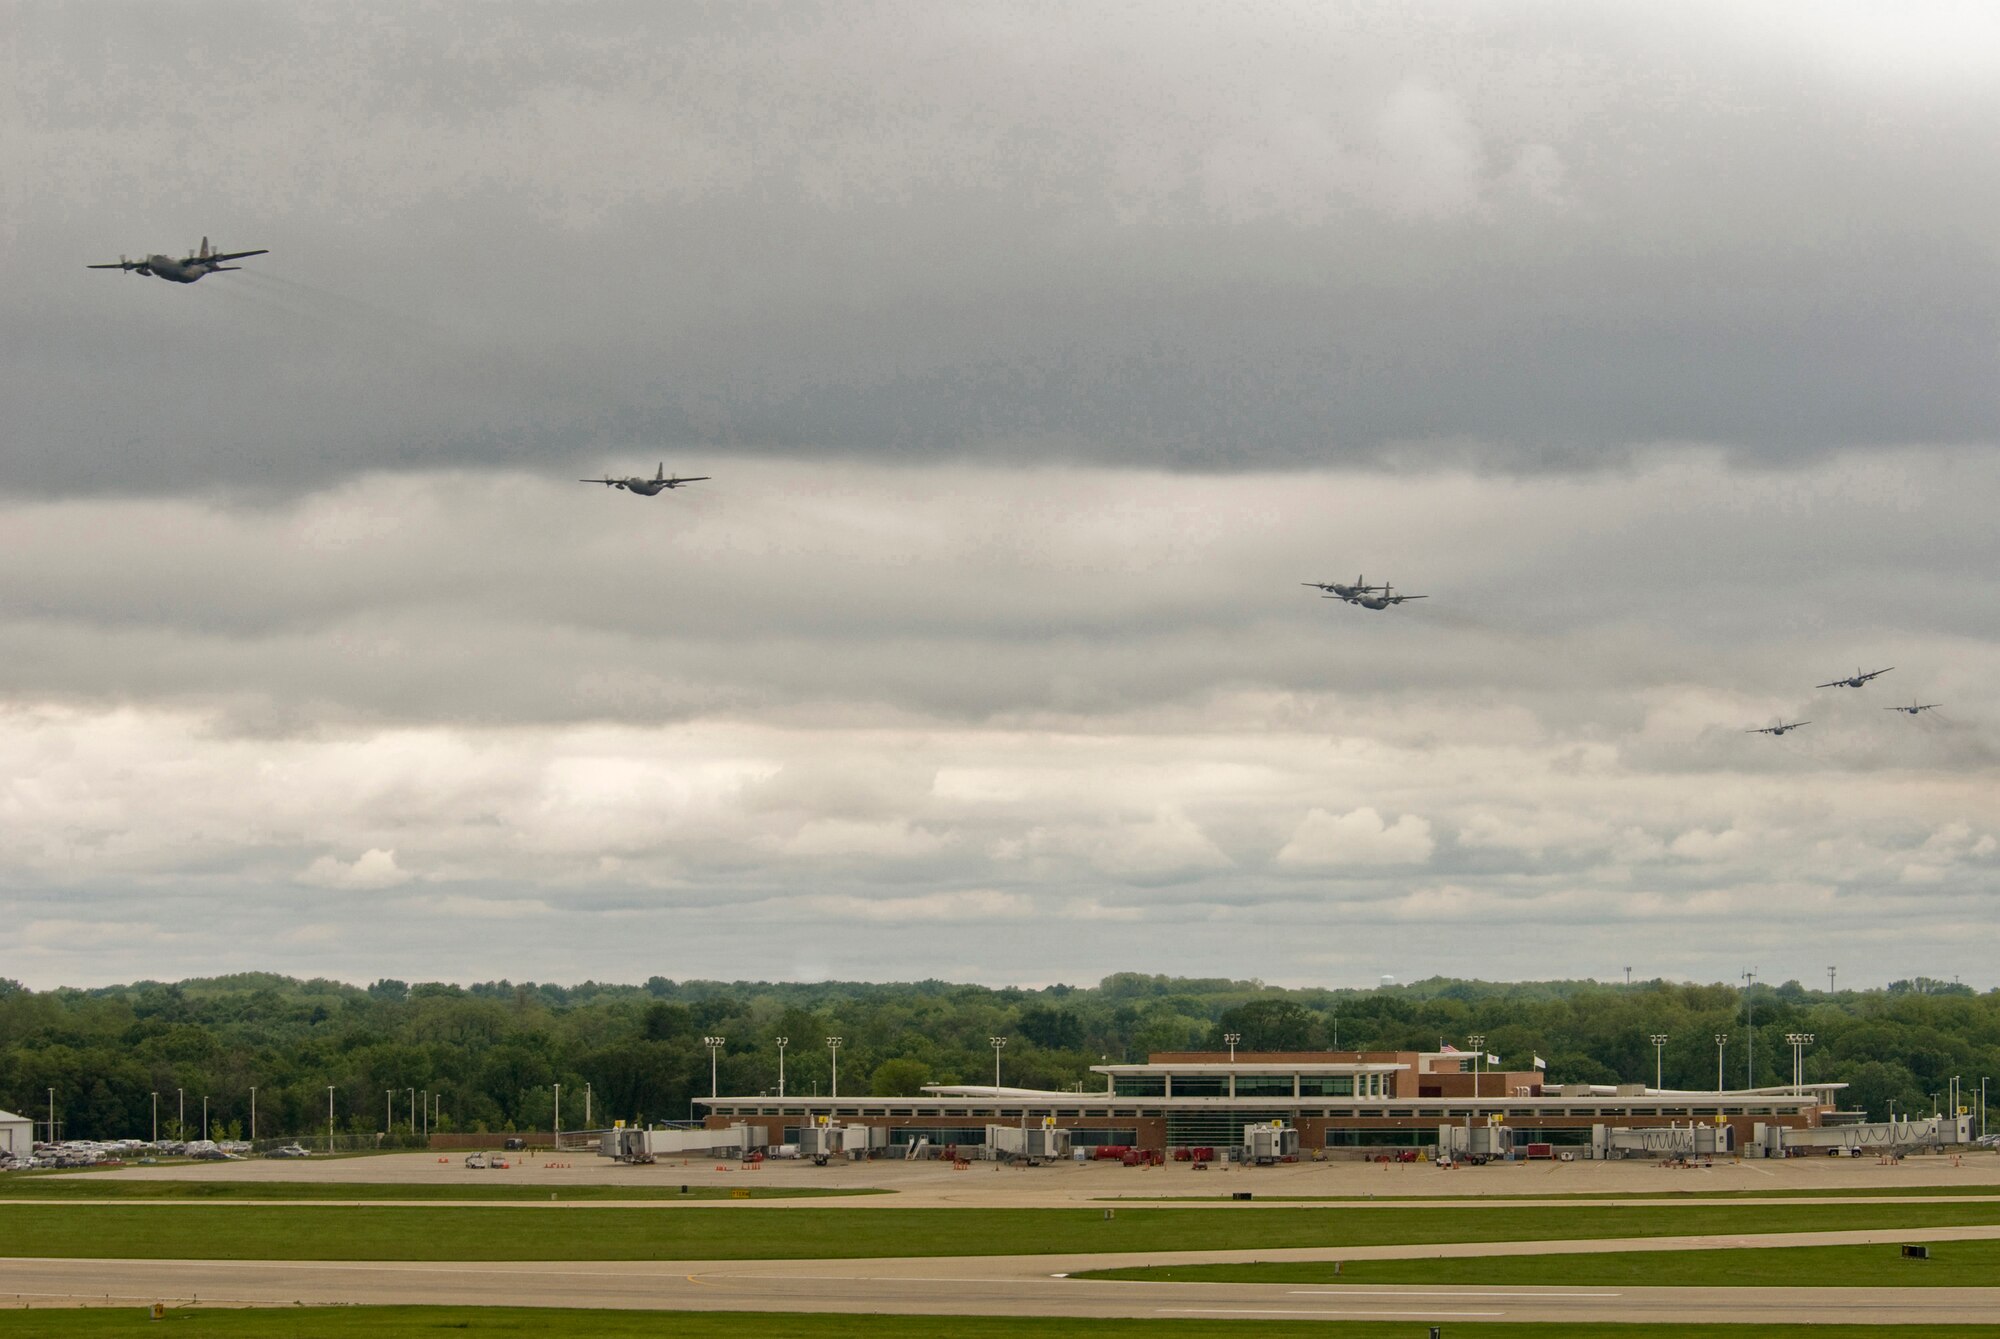 Illinois Air National Guard C-130H3 Hercules aircraft conduct a flyby over the 182nd Airlift Wing in Peoria, Ill., June 2, 2013. The military transport planes created a rare occurrence when seven of the Air National Guard Base’s aircraft flew together simultaneously in formation. The photo was one of five by Staff Sgt. Lealan C. Buehrer, photojournalist with the 182nd Airlift Wing, submitted to the National Guard Bureau media contest. Buehrer was announced the winner of the Air National Guard Outstanding New Photographer category on Feb. 3, 2014. (U.S. Air National Guard photo by Staff Sgt. Lealan Buehrer/Released)